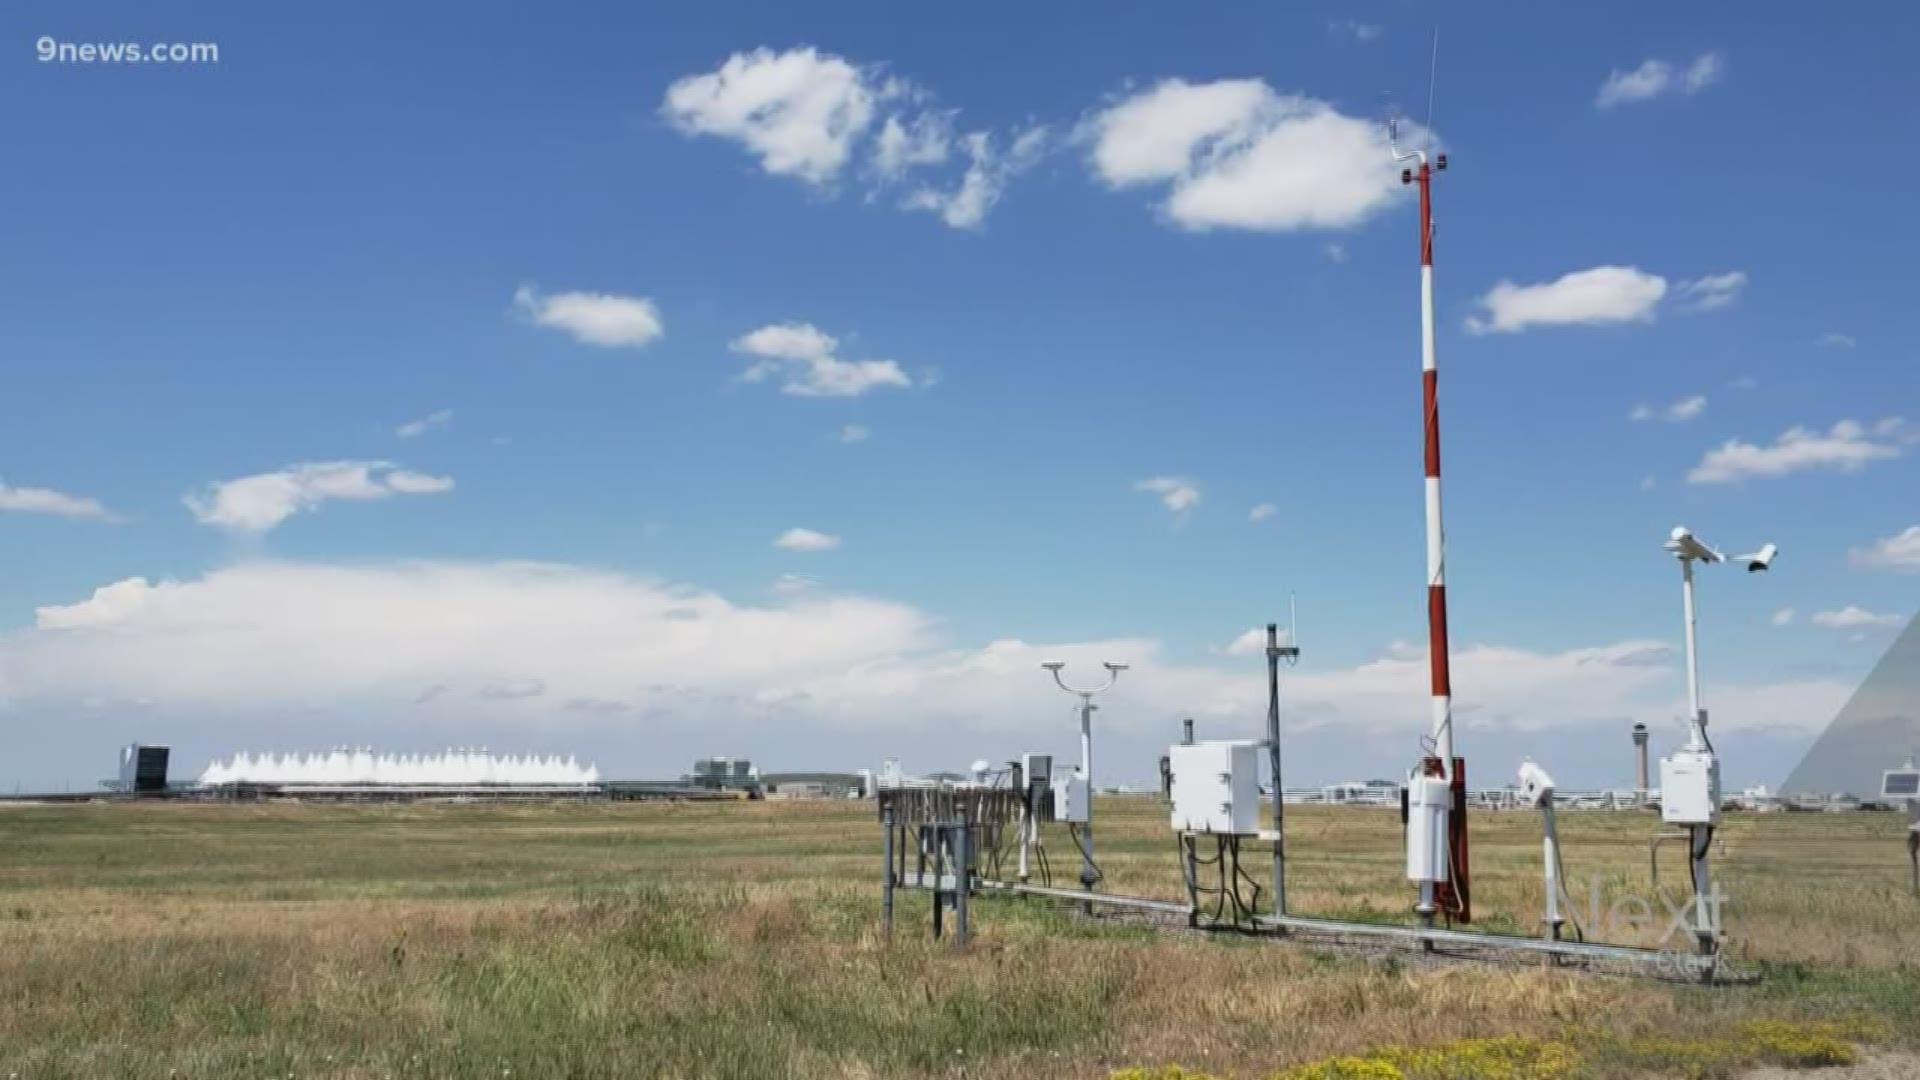 The National Weather Service uses a special system out at DIA to record the temps we hit in the Mile High City. Here's how it works.